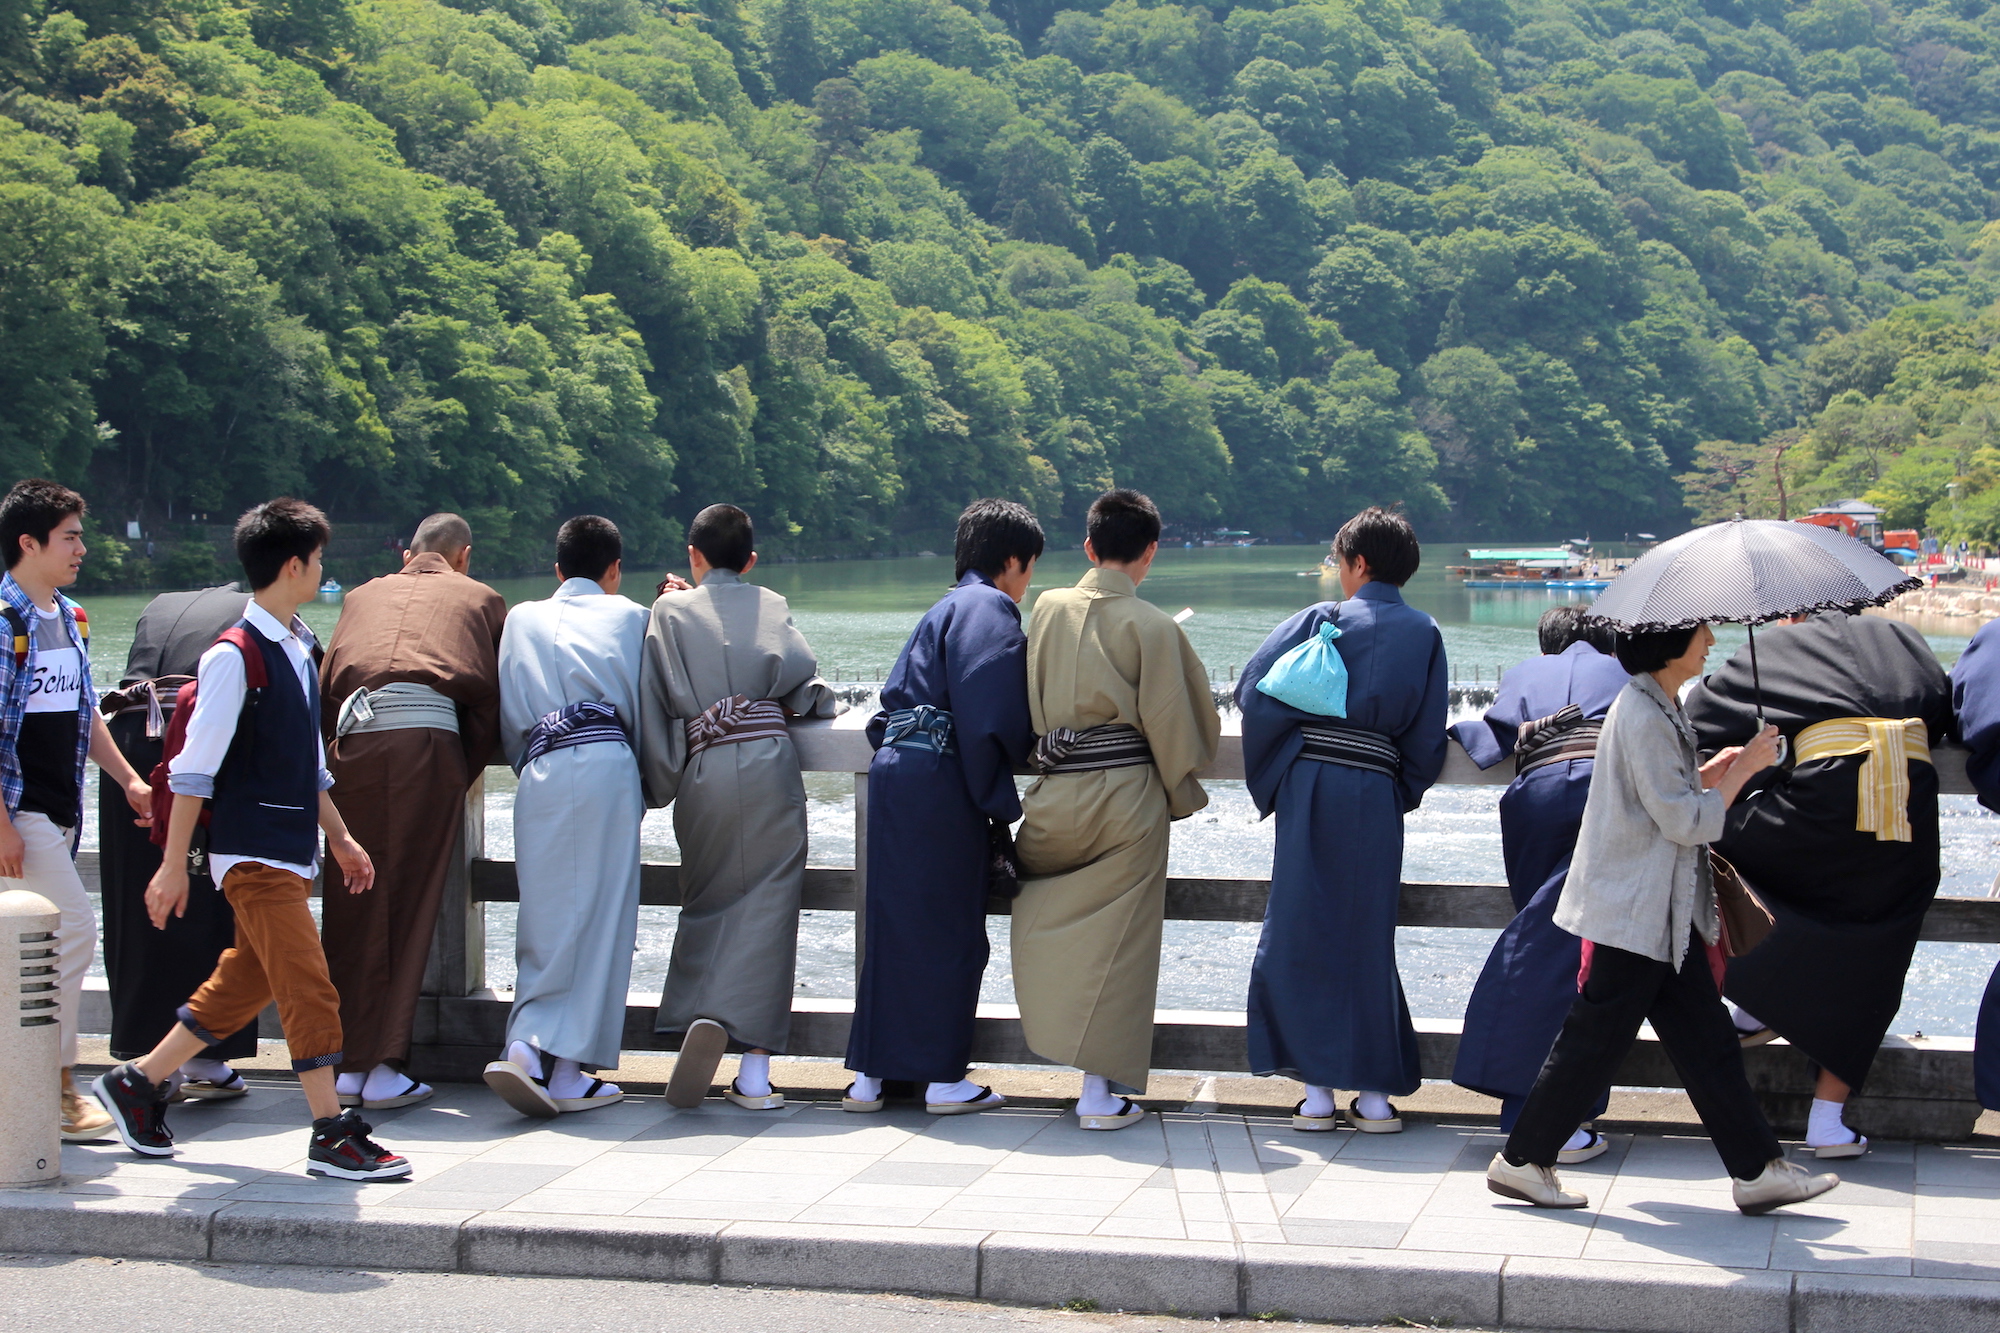 A group of student in traditional wafuku, traditional japanese attire